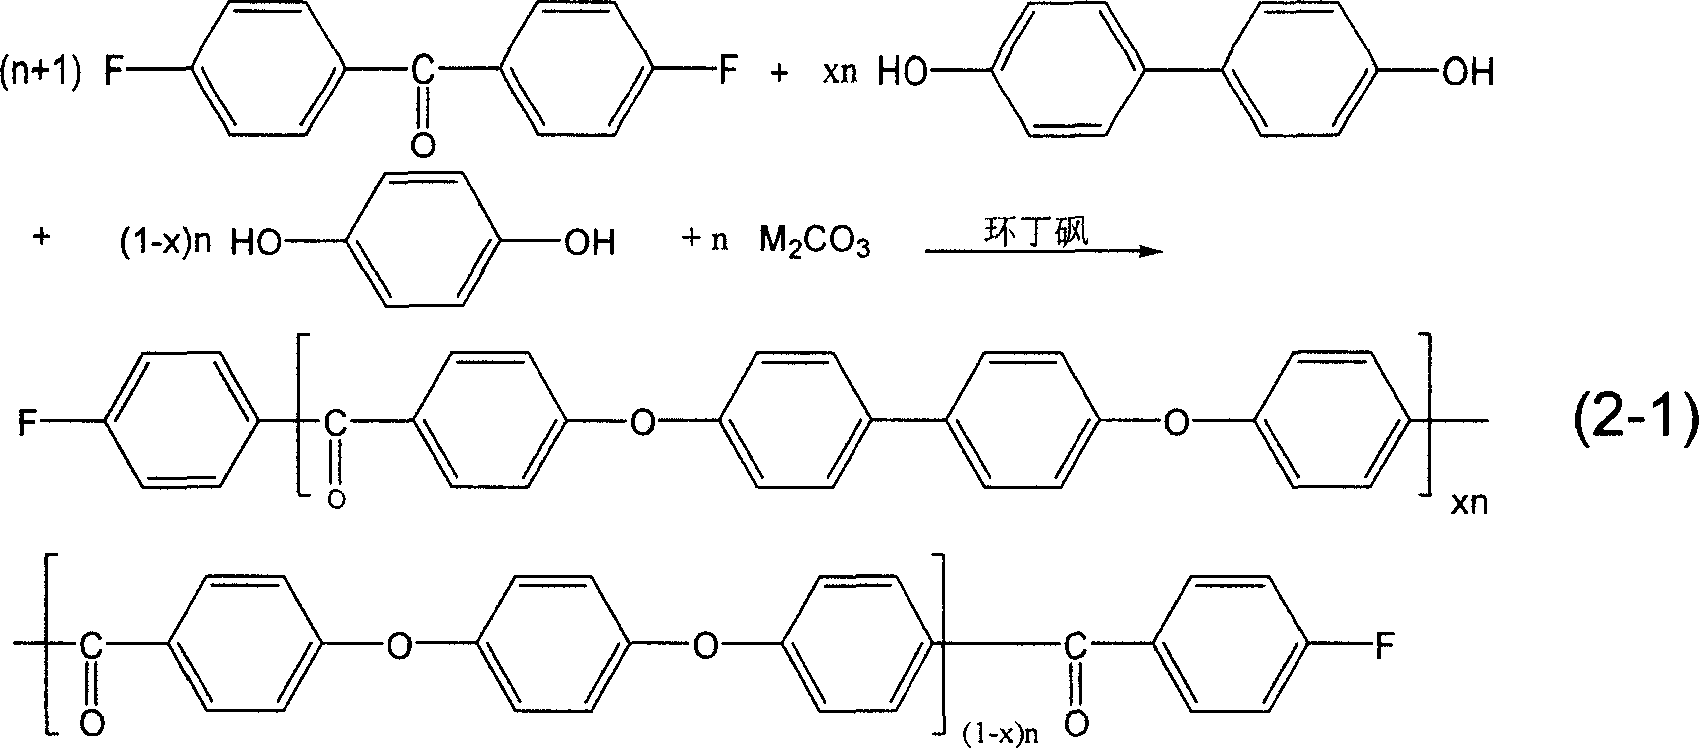 Synthesis method of ternary copolymer containing PEDEK and PEEK using sulfolane as solvent